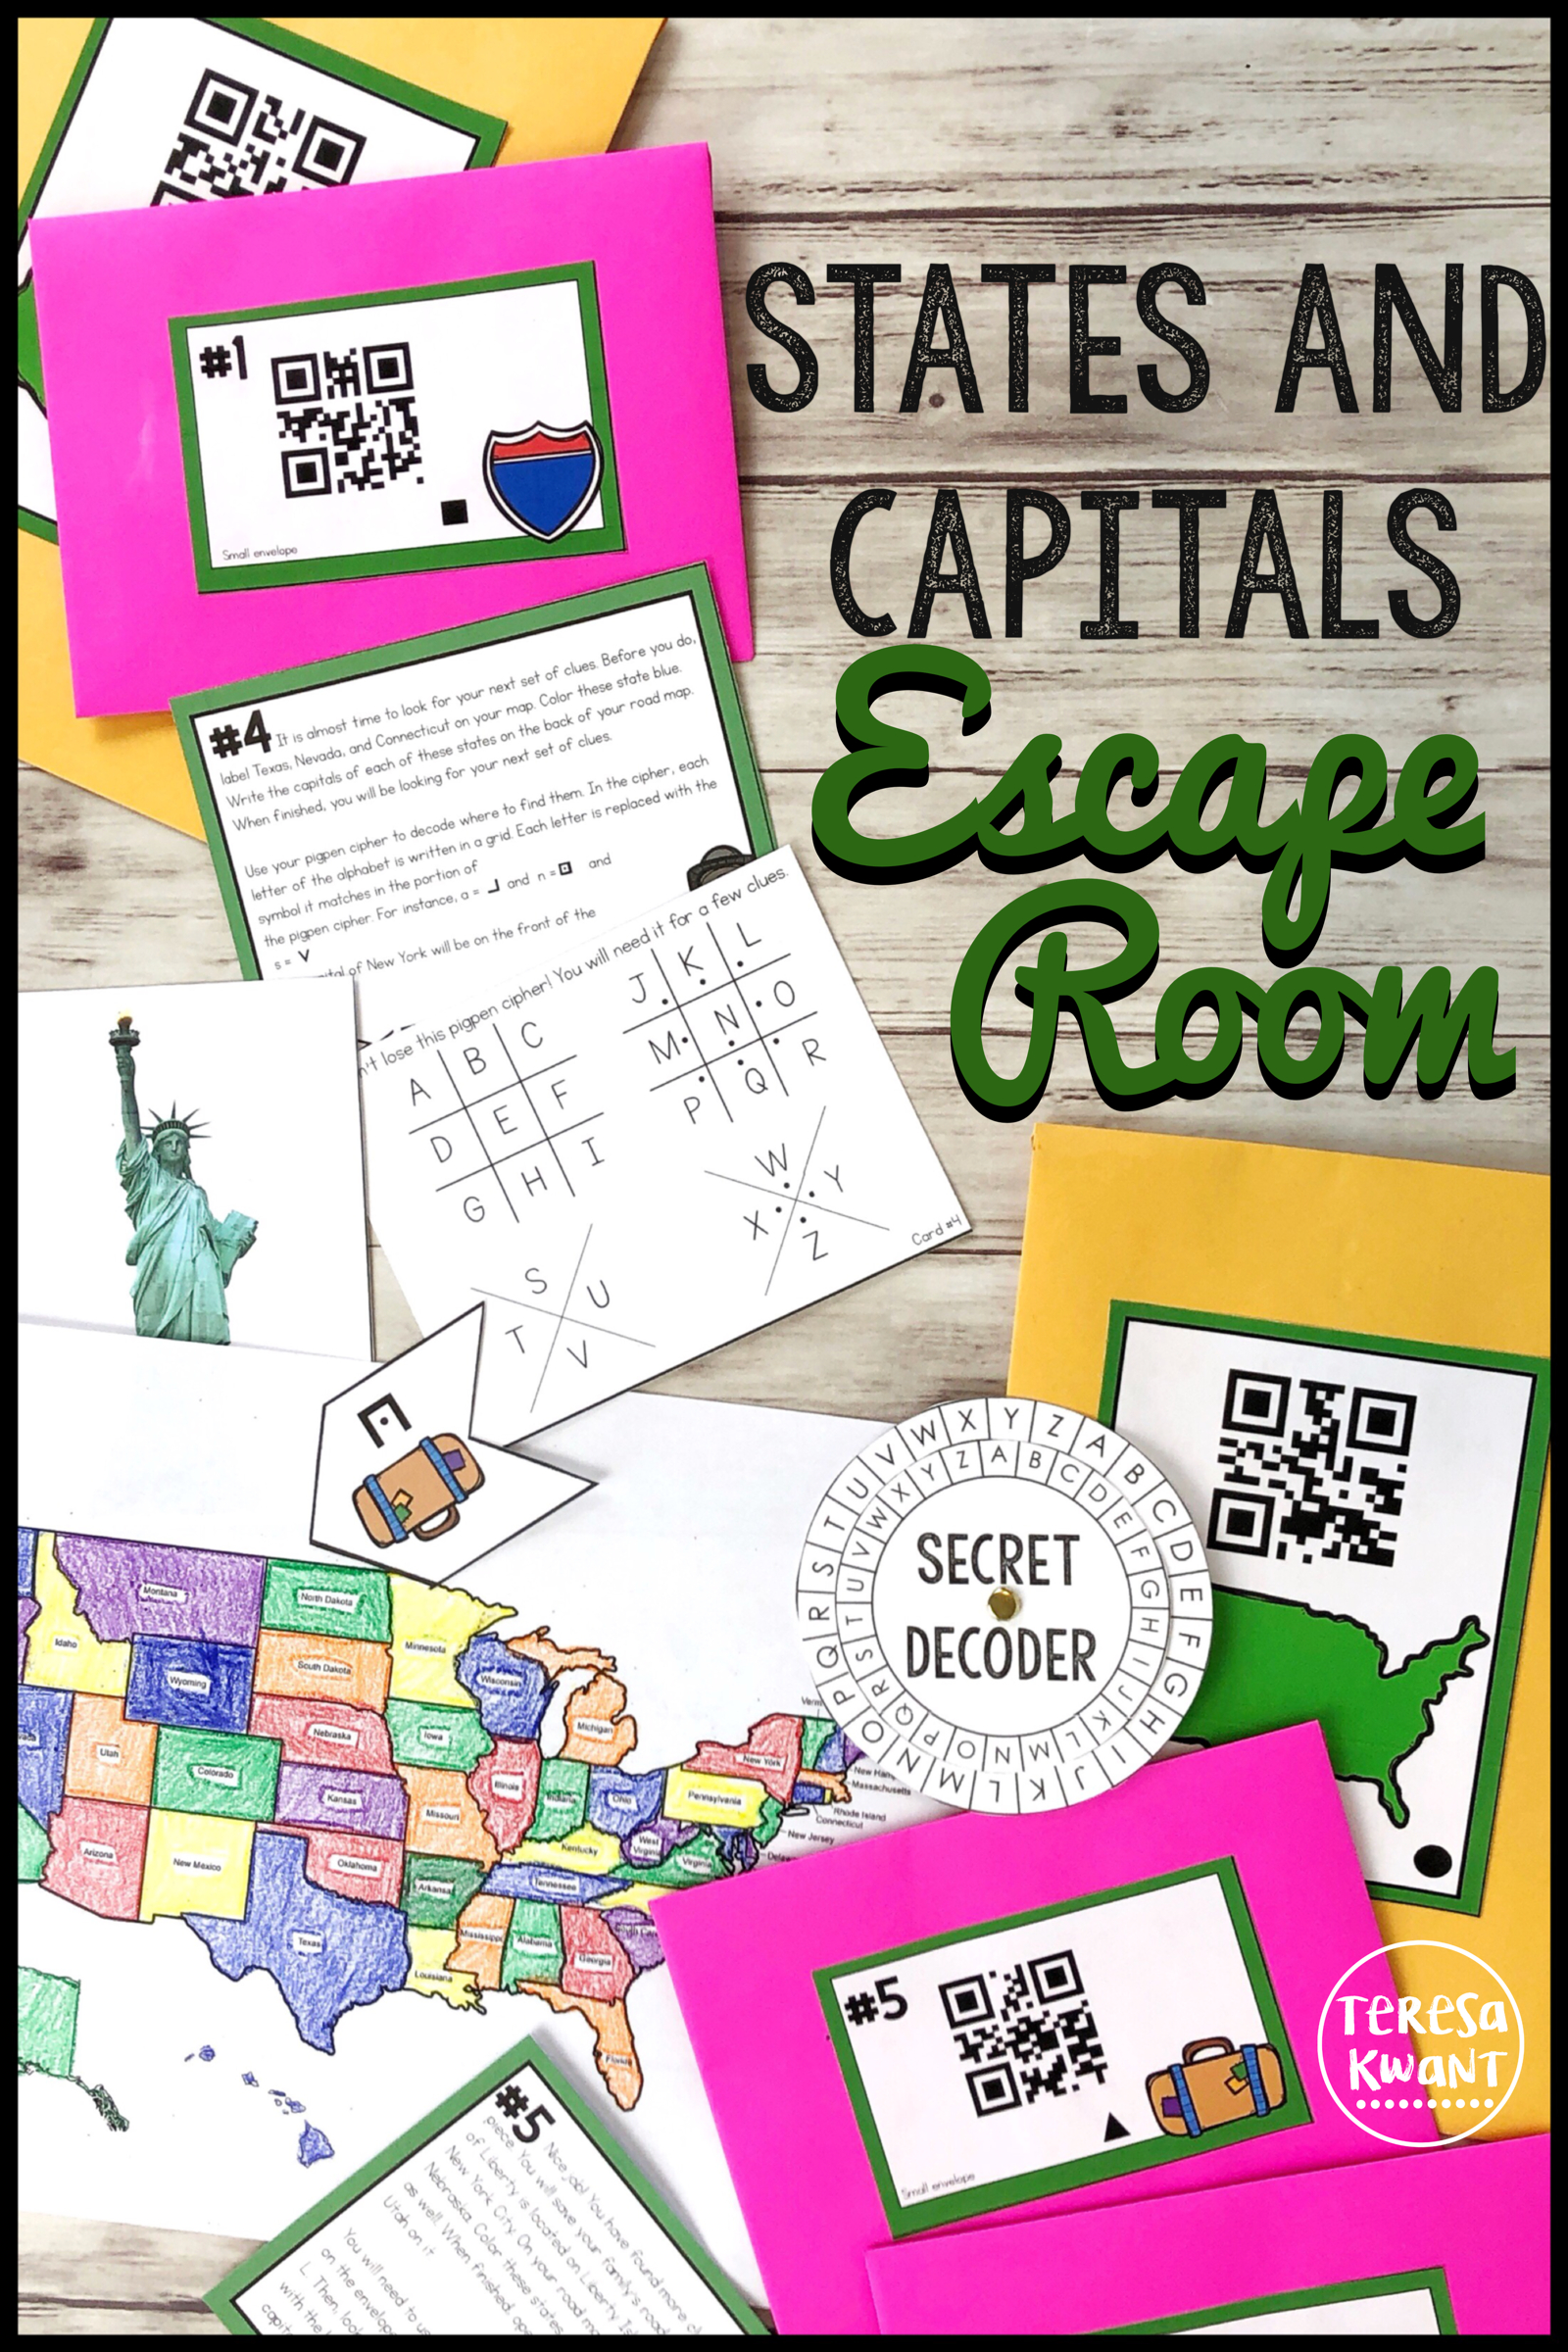 States And Capitals Escape Room Cracking The Classroom Code